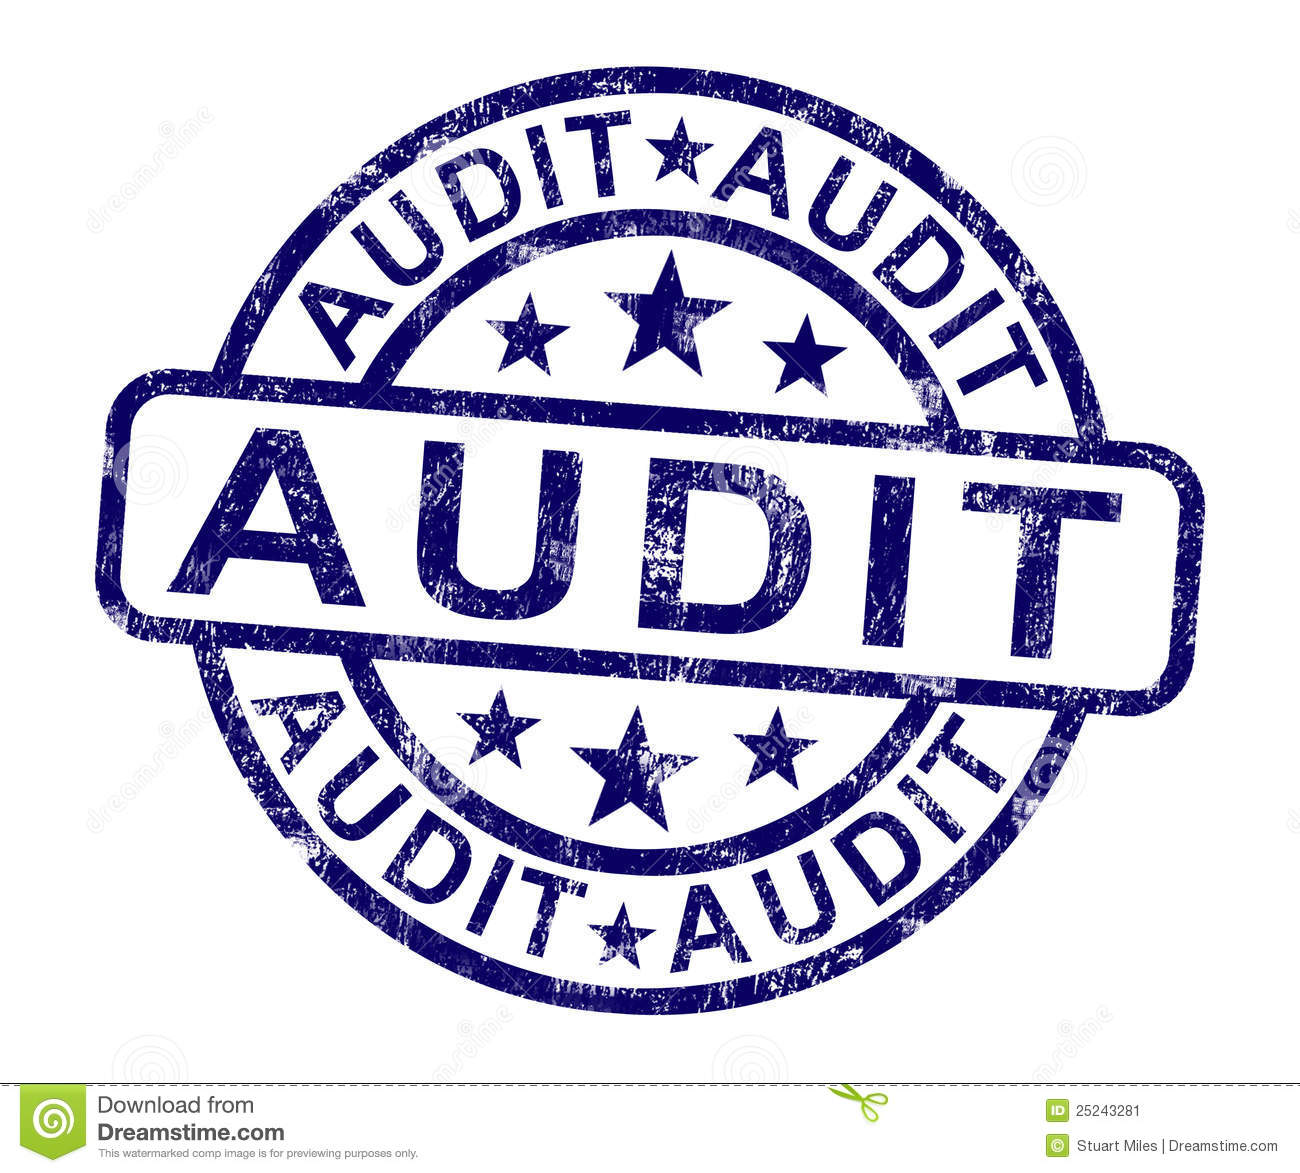 accountant clipart auditor